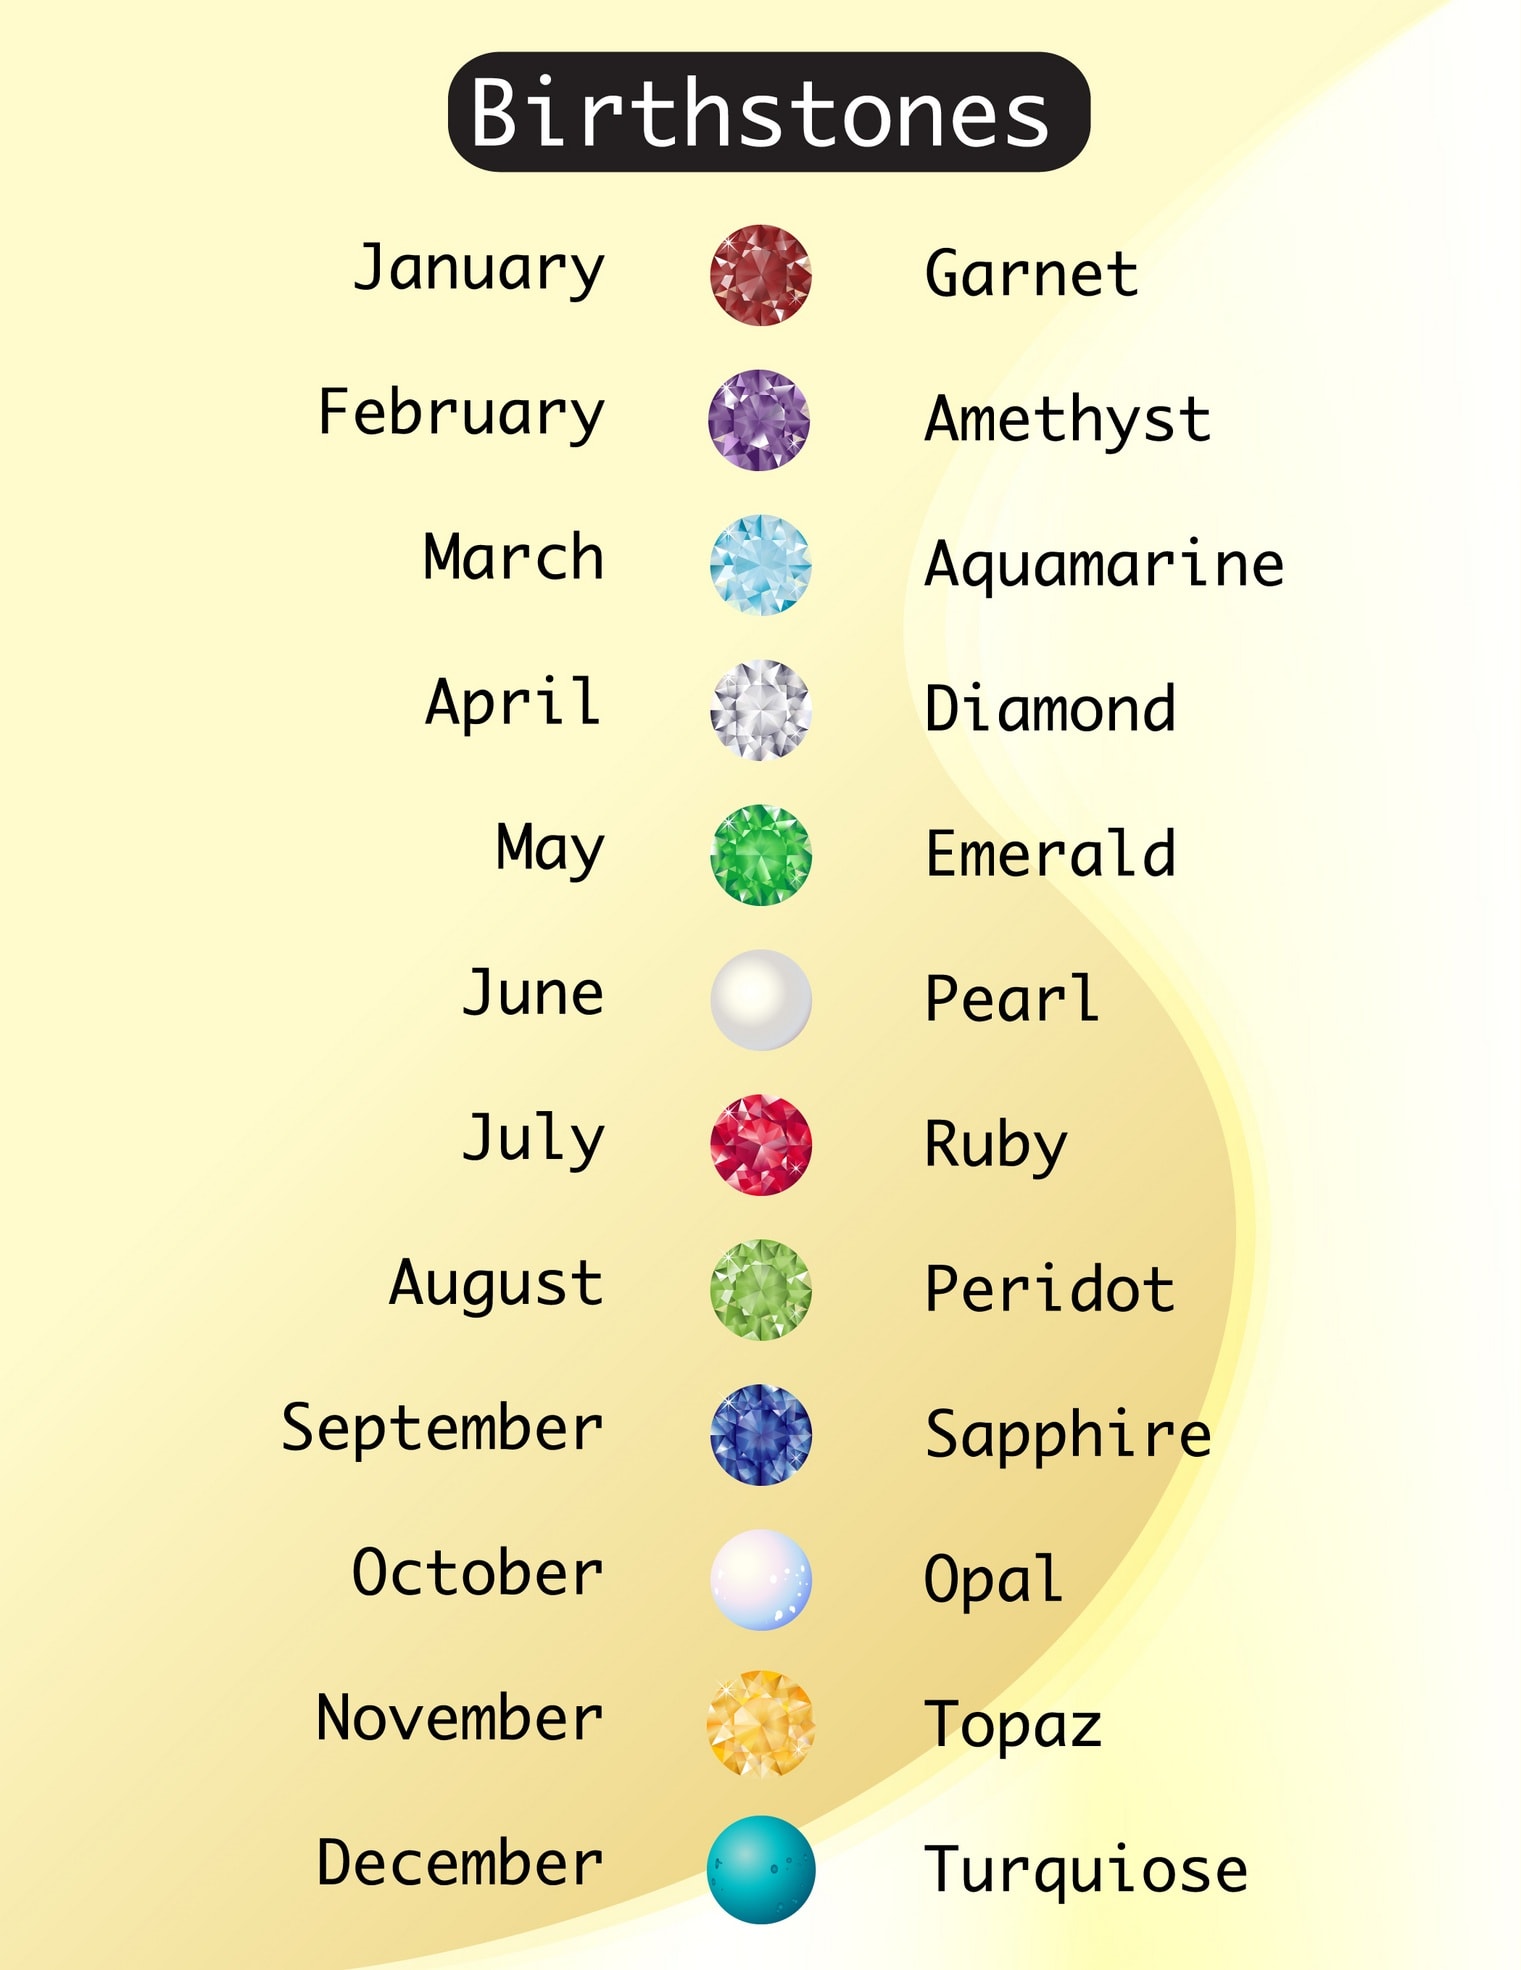 Birthstones Exposed: Uncovering the Truth Behind Crystals The Zodiac